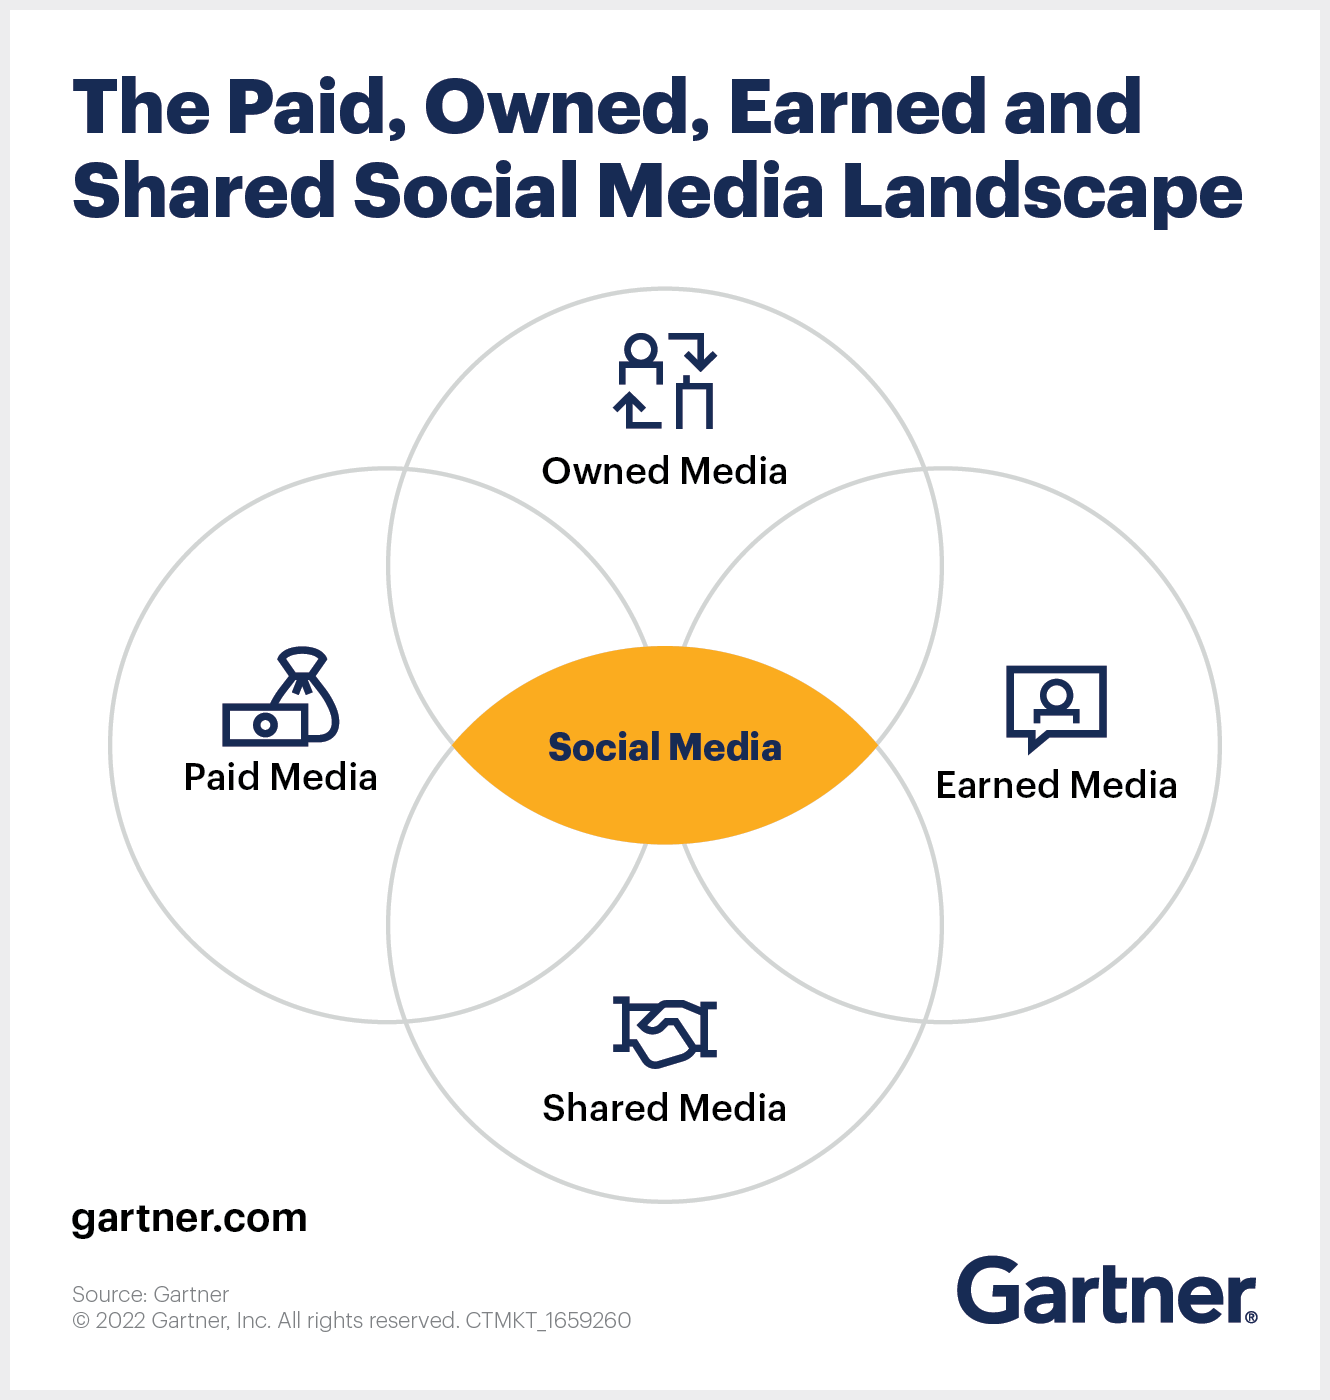 The Paid, Owned, Earned and Shared Social Media Landscape